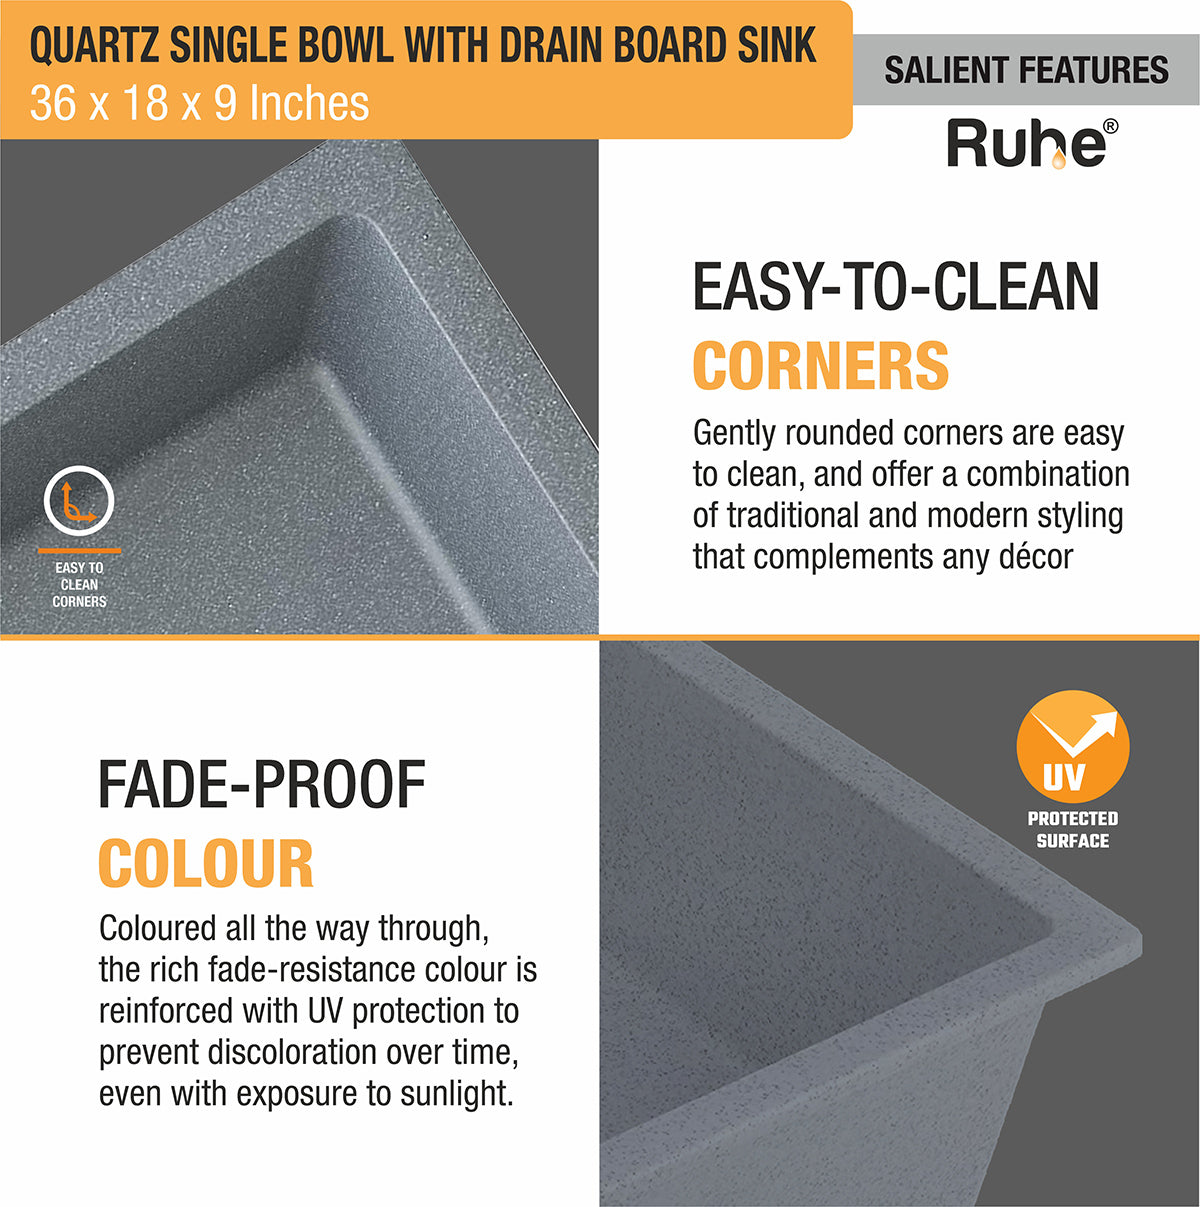 Quartz Single Bowl Smoke Grey Kitchen Sink with Drainboard (36 x 18 x 9 inches) easy to clean, fade proof